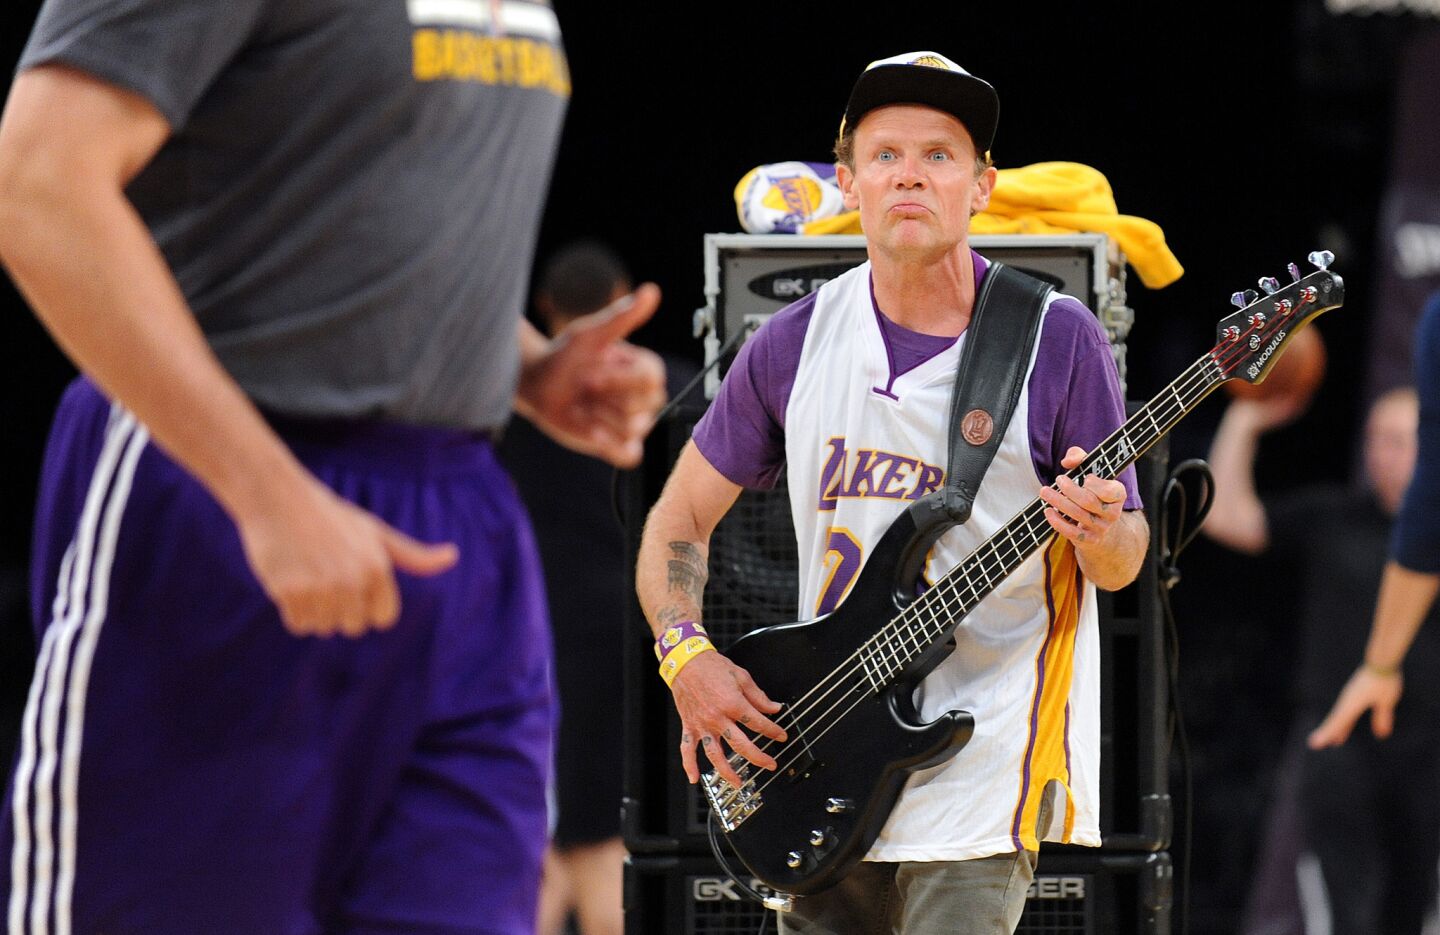 Rock star "Flea" rehearses the national anthem before Kobe Bryant's last game on April 13, 2016, as players warm-up.